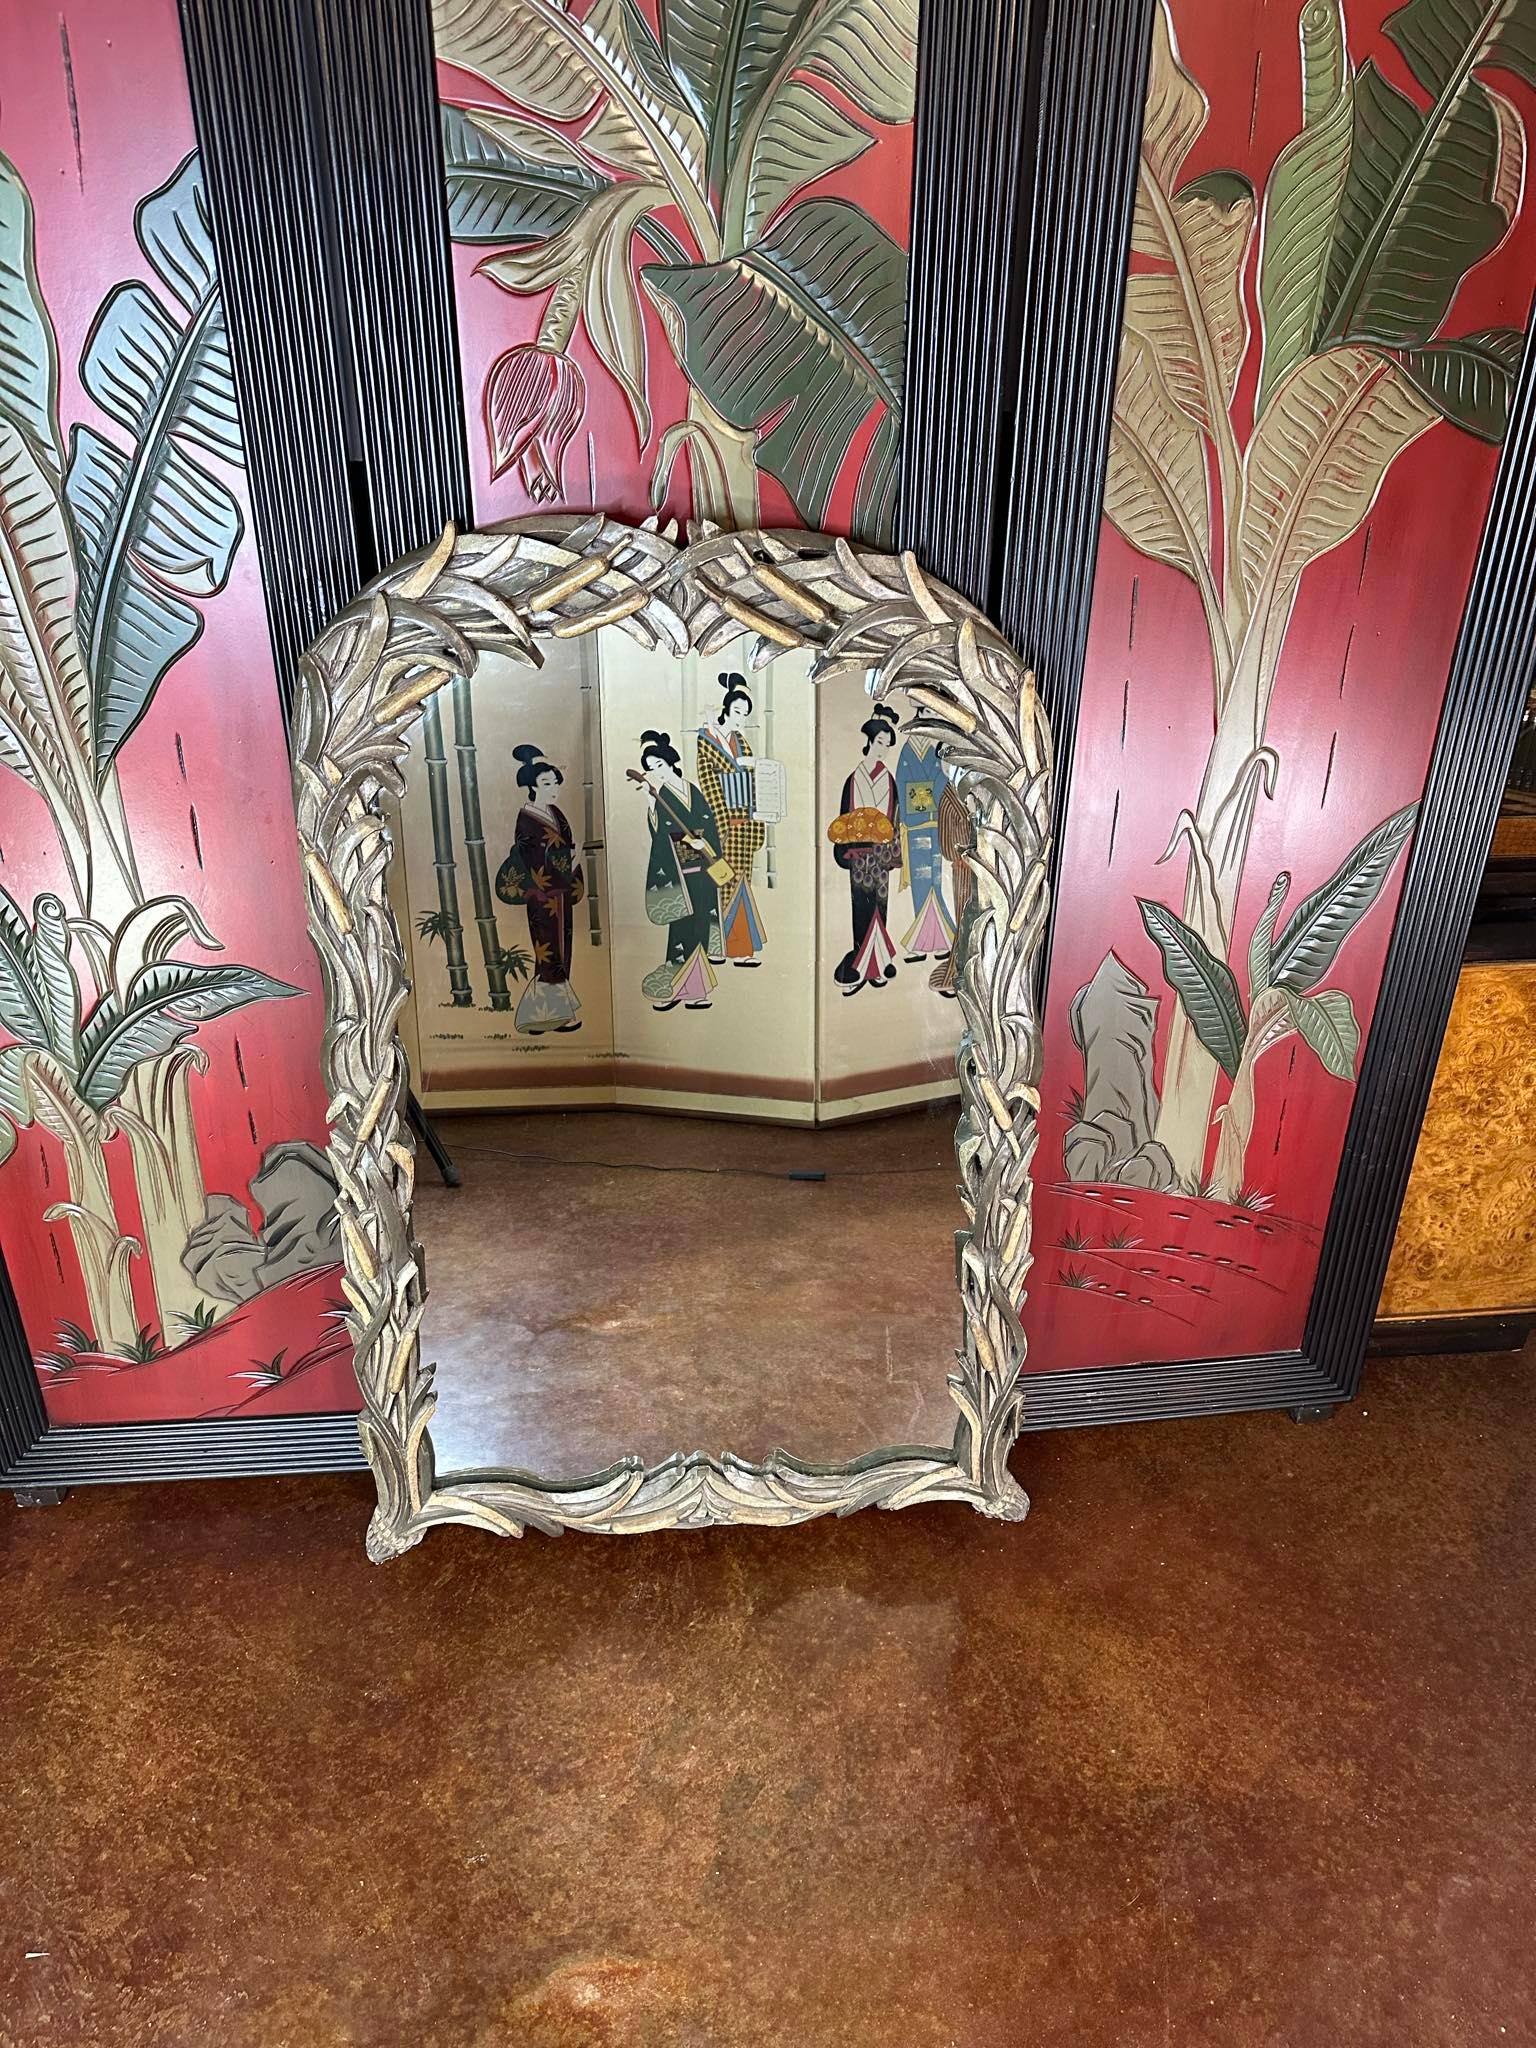 Free shipping in the continental United States.

Hollywood regency. 
Palm Beach regency. 
Art nouveau. 
Hand carved.
Botanical motif.
Hand painted in two colors.
Very similar colors, but very complimentary. 
Wheat, or willows intricately carved,